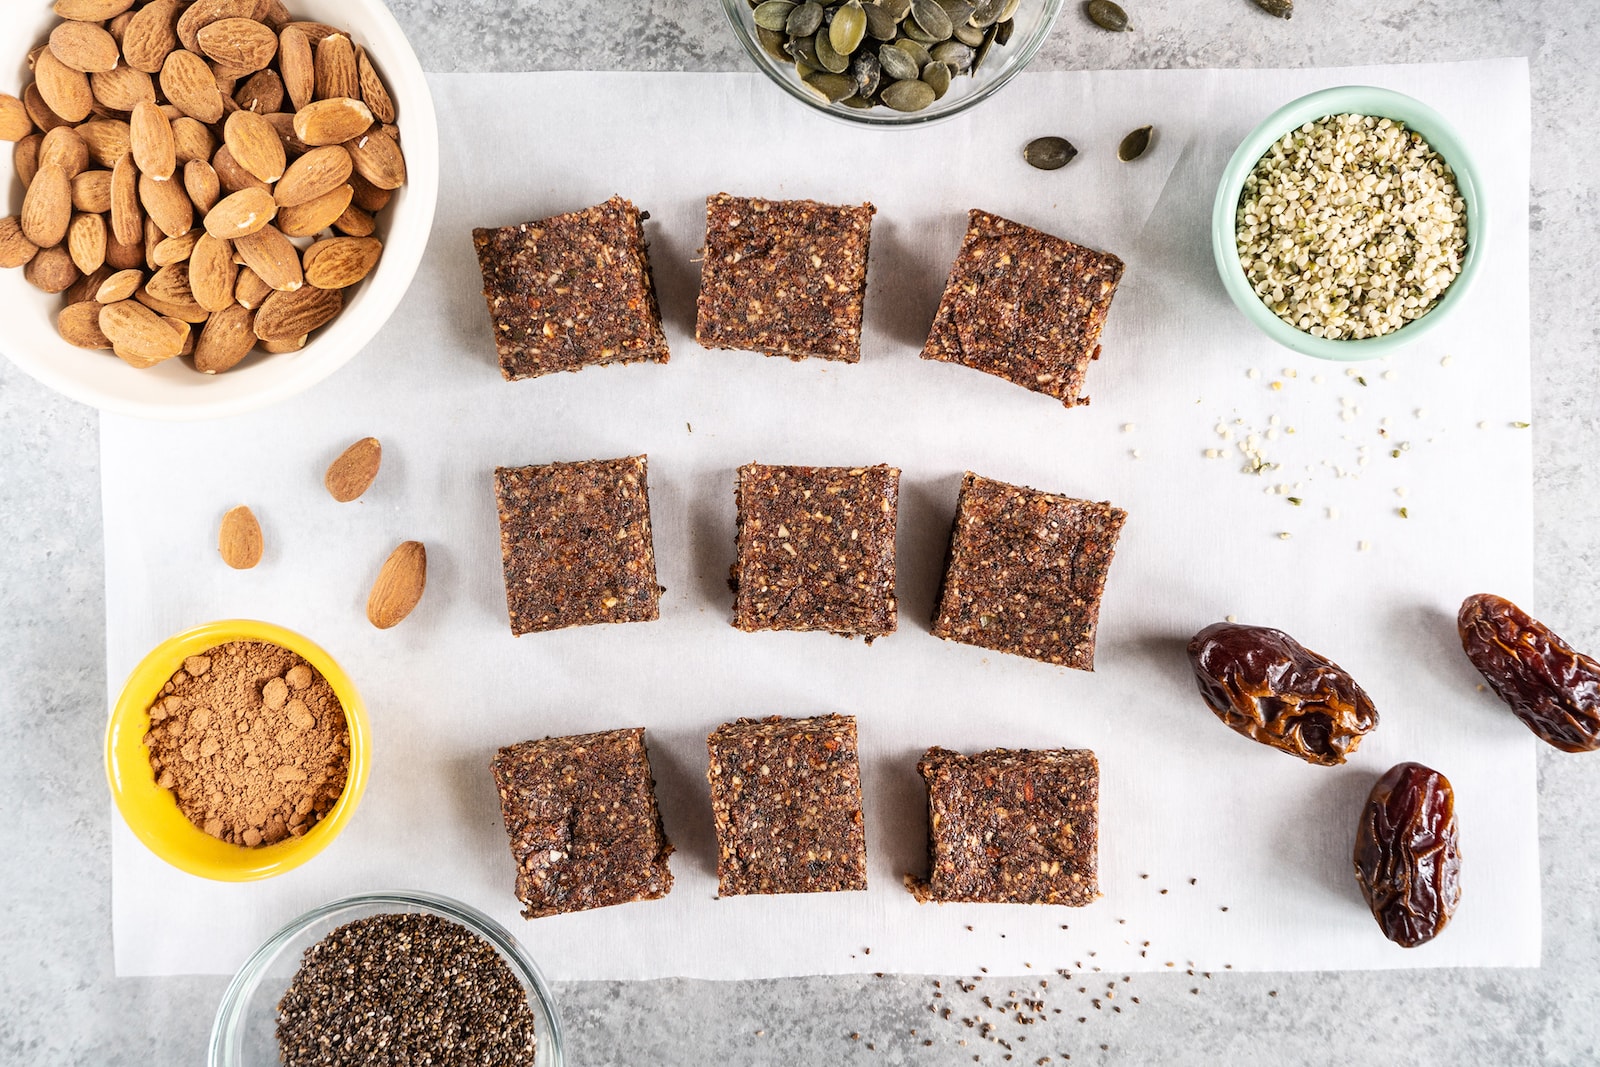 Protein Bar Market to show 6.3% increase in its CAGR by 2024 Globally